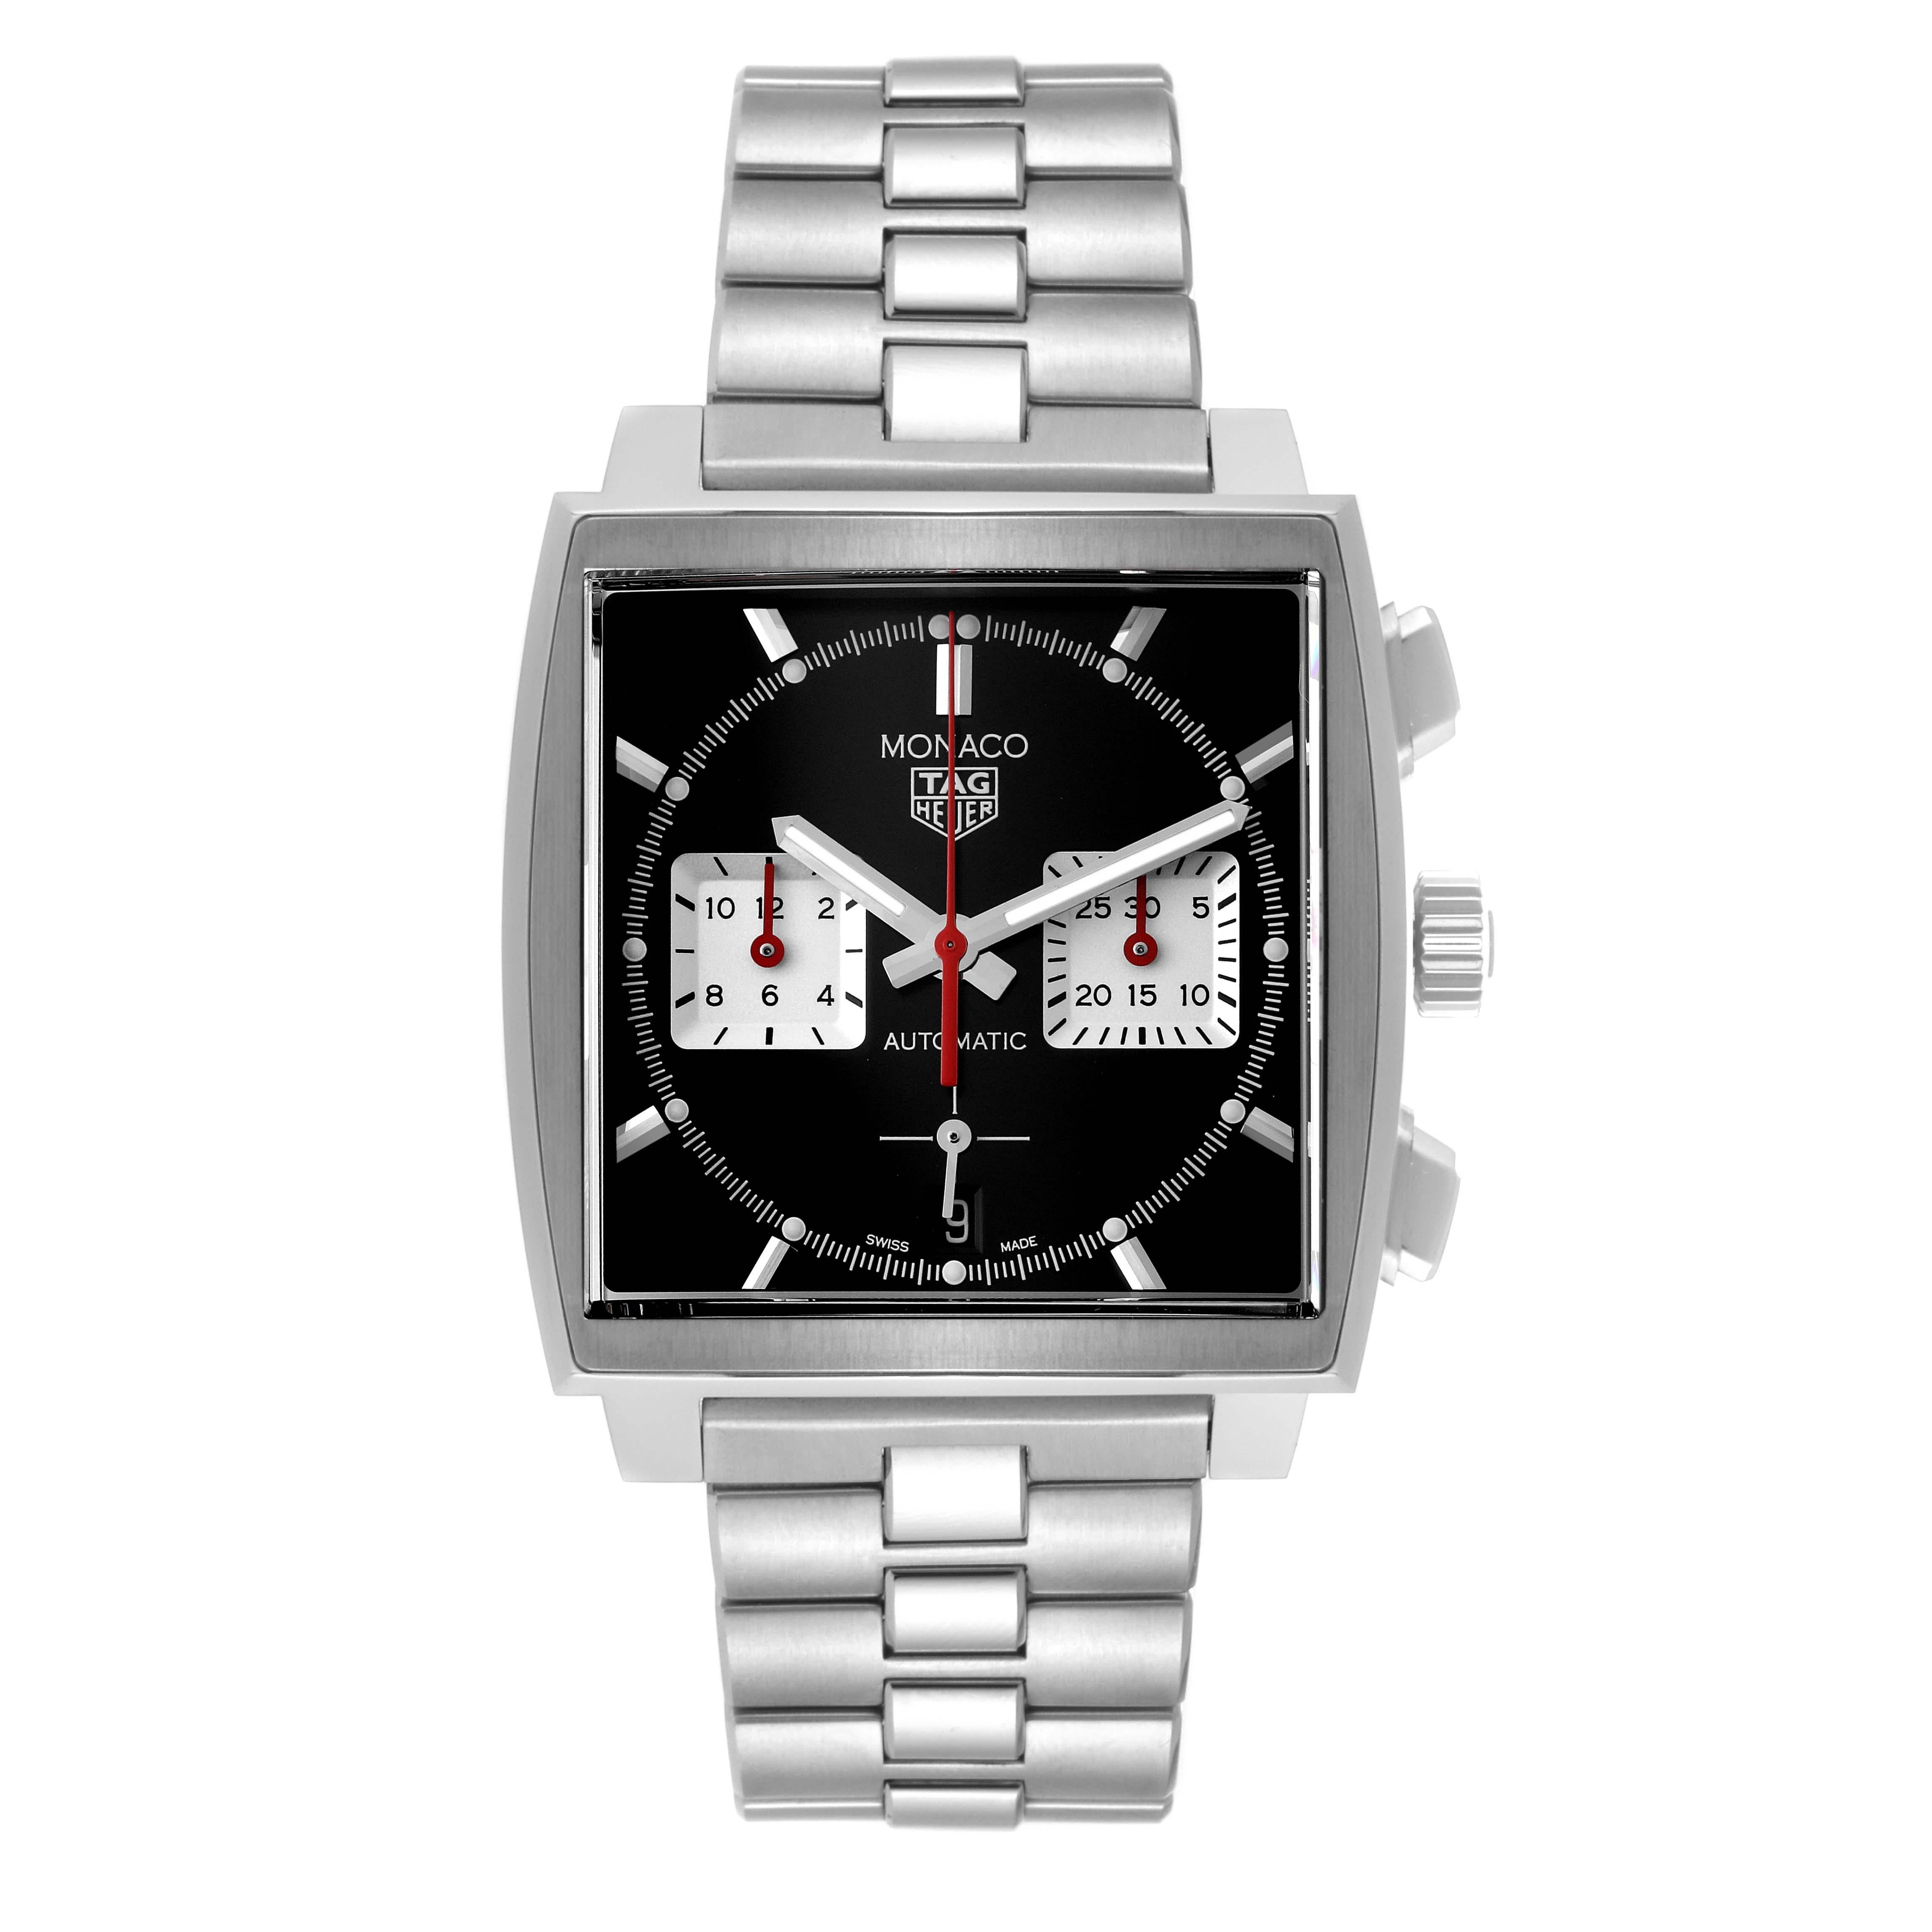 Tag Heuer Monaco Calibre 02 Black Dial Steel Mens Watch CBL2113 Unworn. Automatic self-winding movement. Alternate fine-brushed and polished stainless steel case 39.0 x 39.0 mm. Fluted crown. Transparent exhibition sapphire crystal case back.